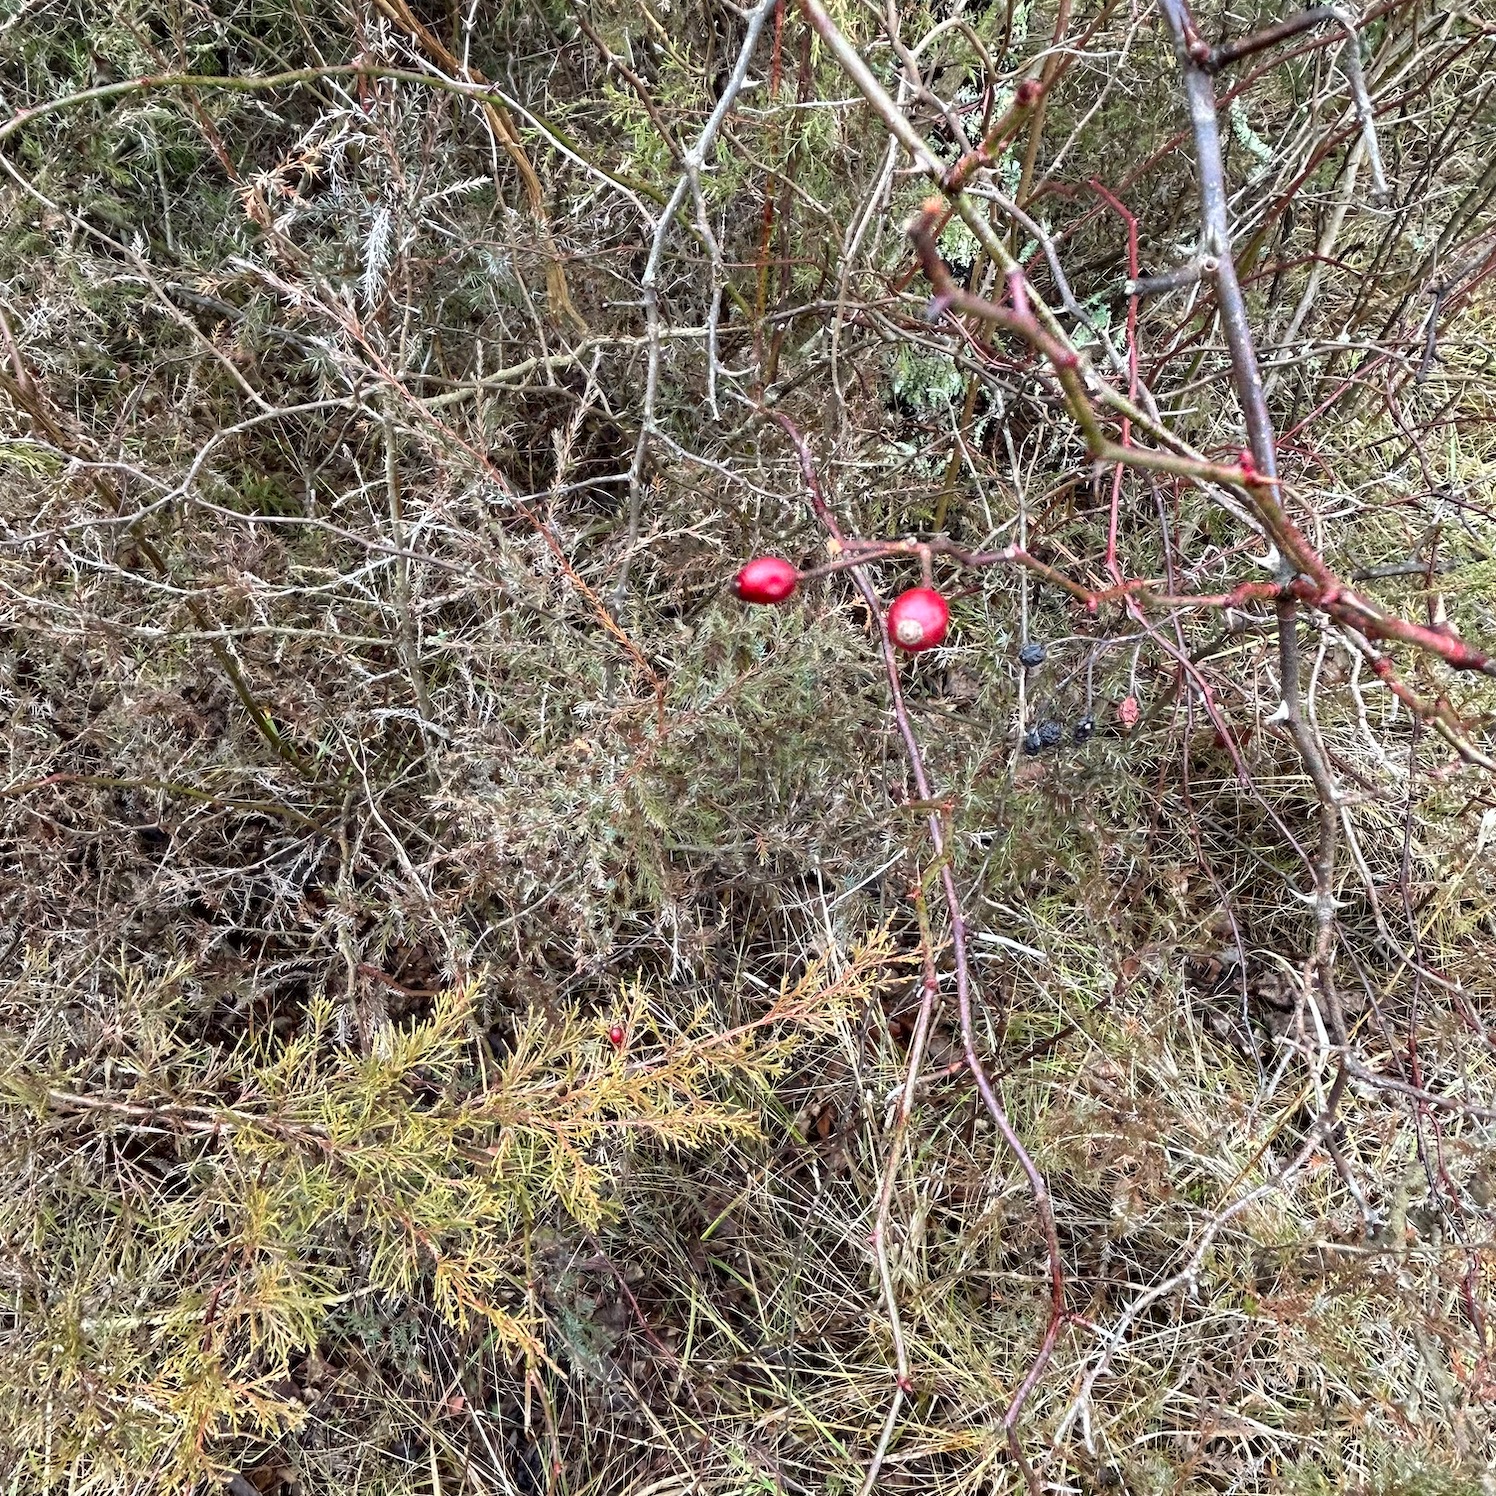 two pink berries in a brown-green field